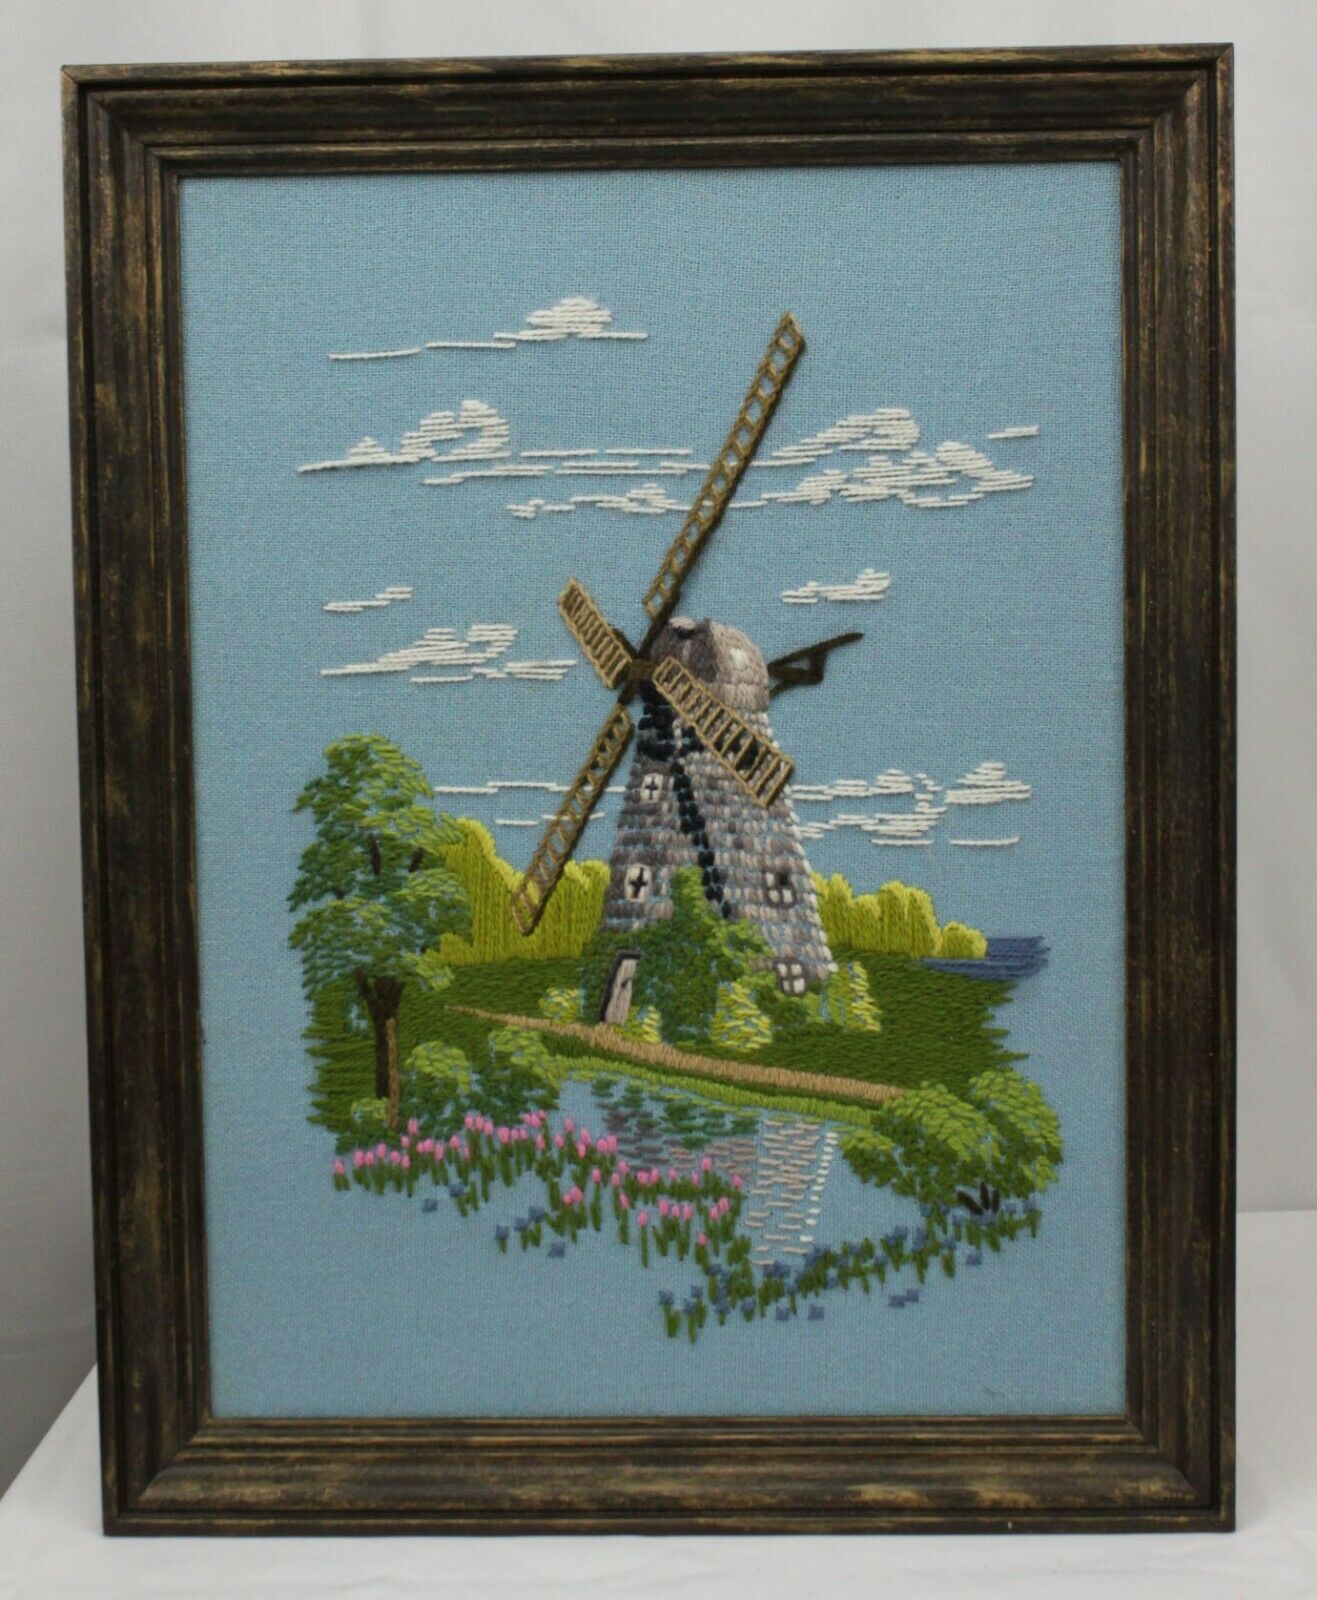 Vtg Completed Embroidery Picture Petticoat Dutch Windmill Framed Tulips Crewel